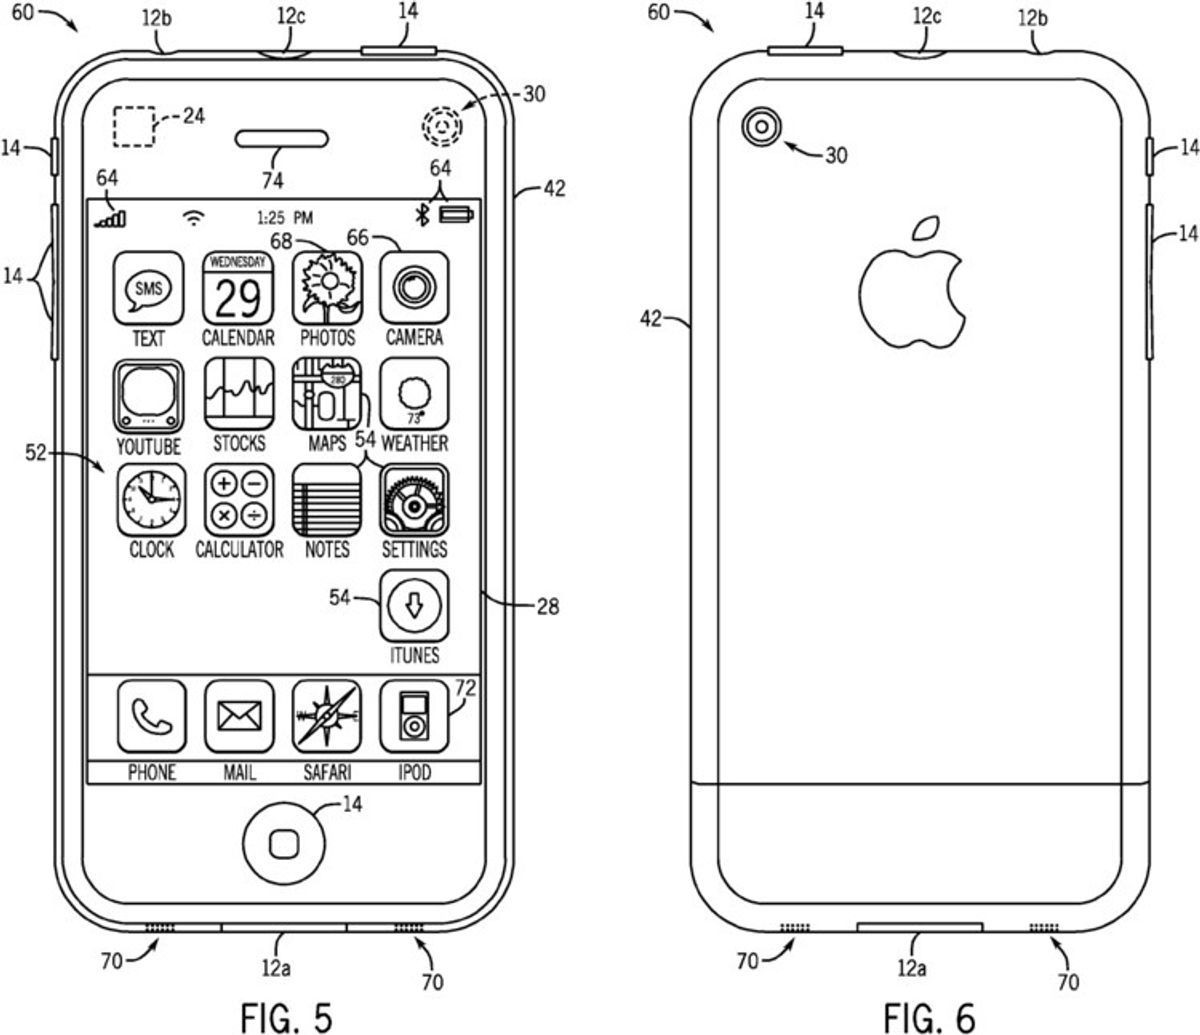 iPhone Technology Patent: Why It Makes Me Feel Some Type Of Way